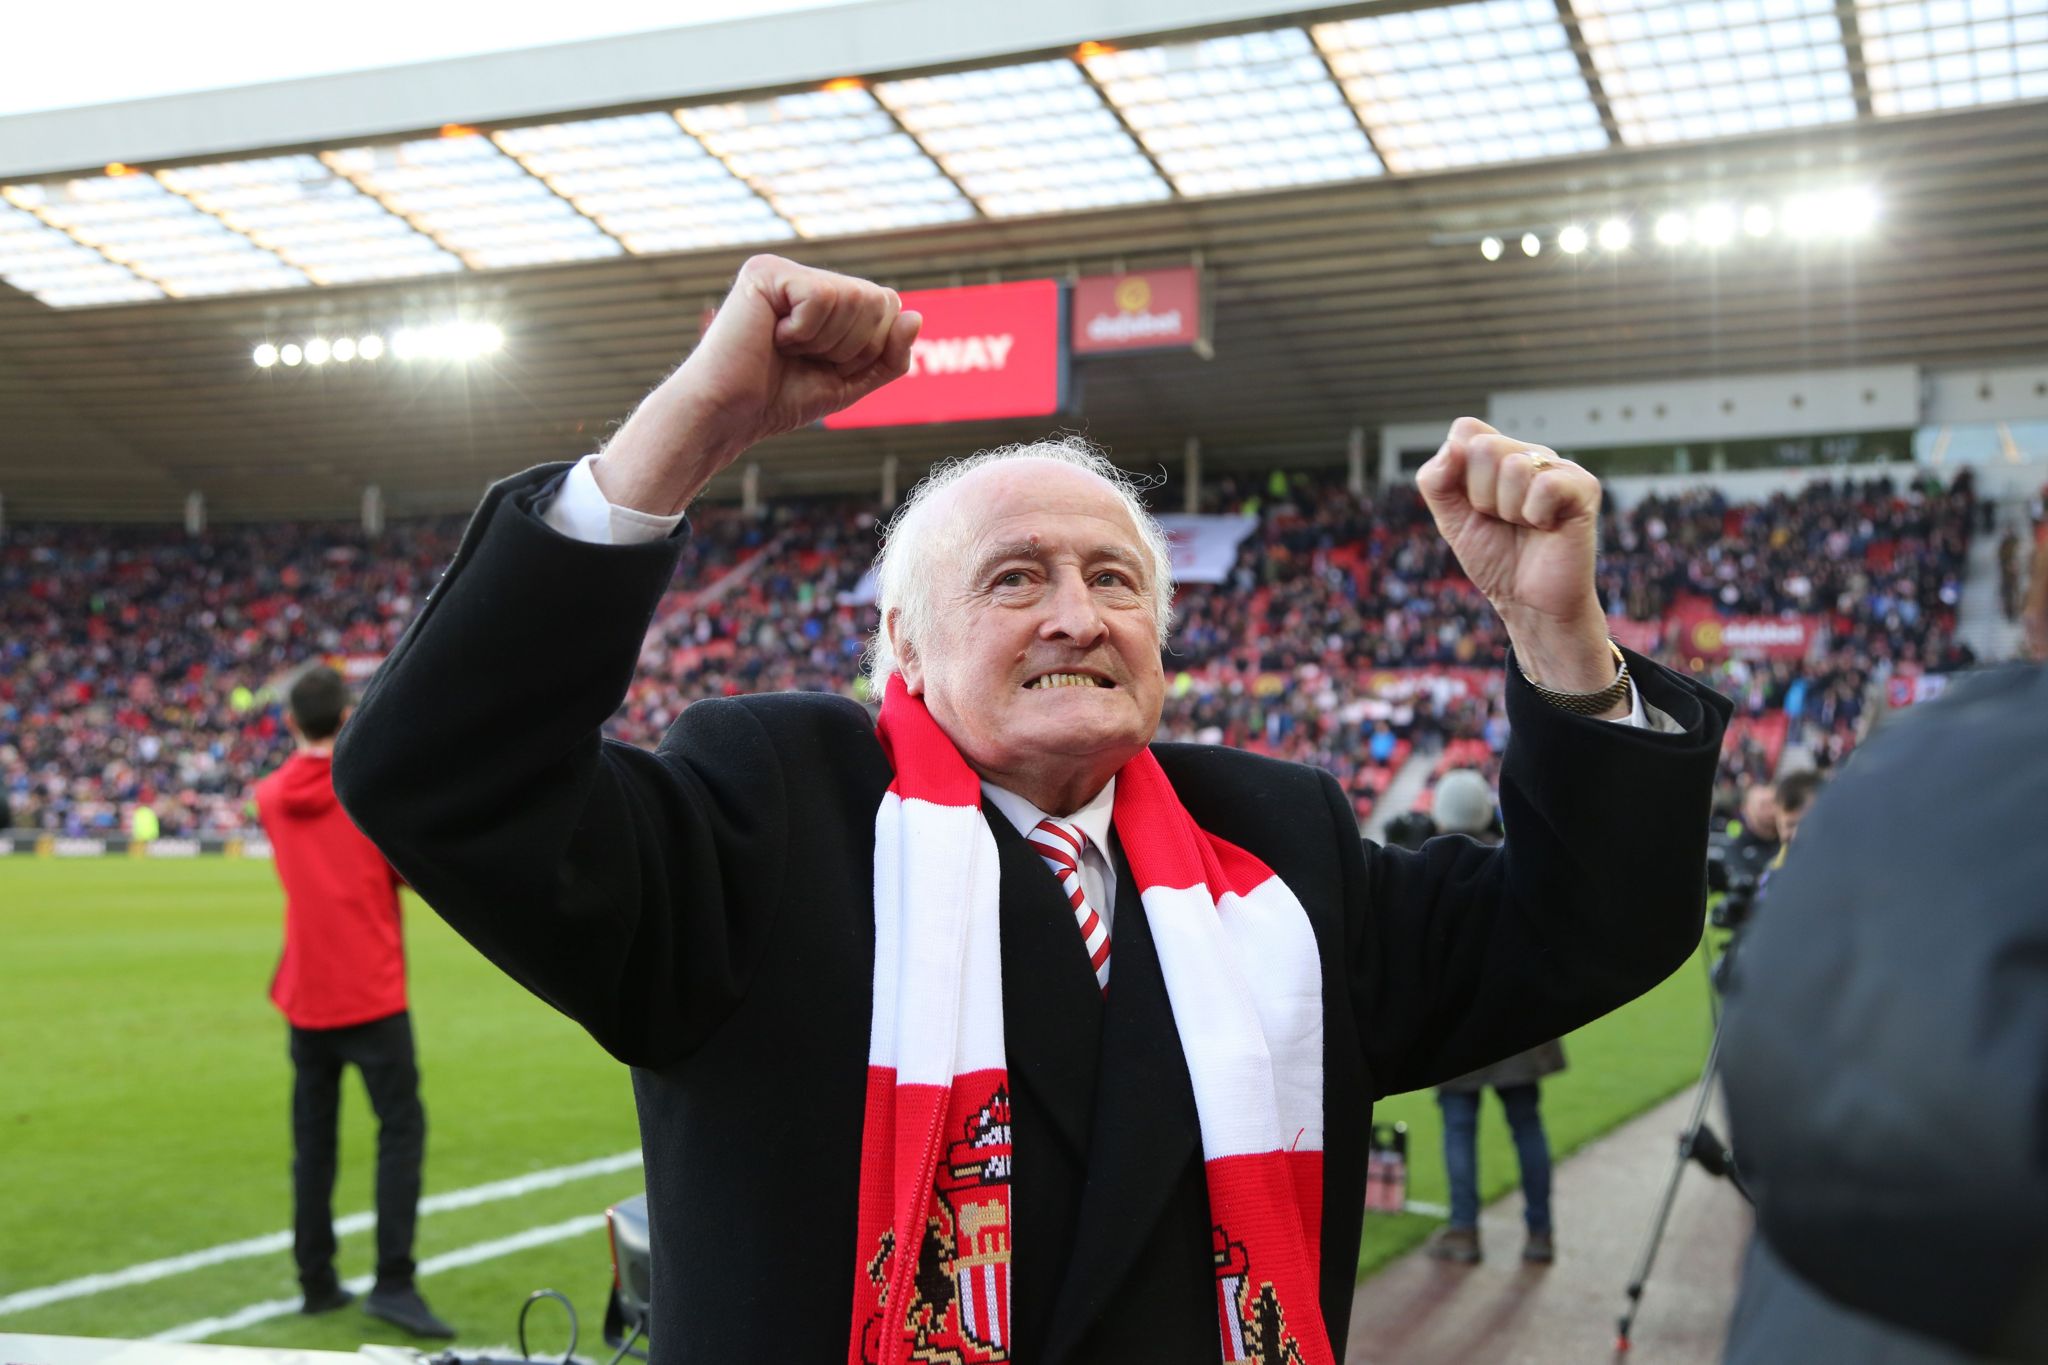 Ex Sunderland player Charlie Hurley takes the crowds applause during the Premier League match between Sunderland and Hull City at Stadium of Light on November 19, 2016